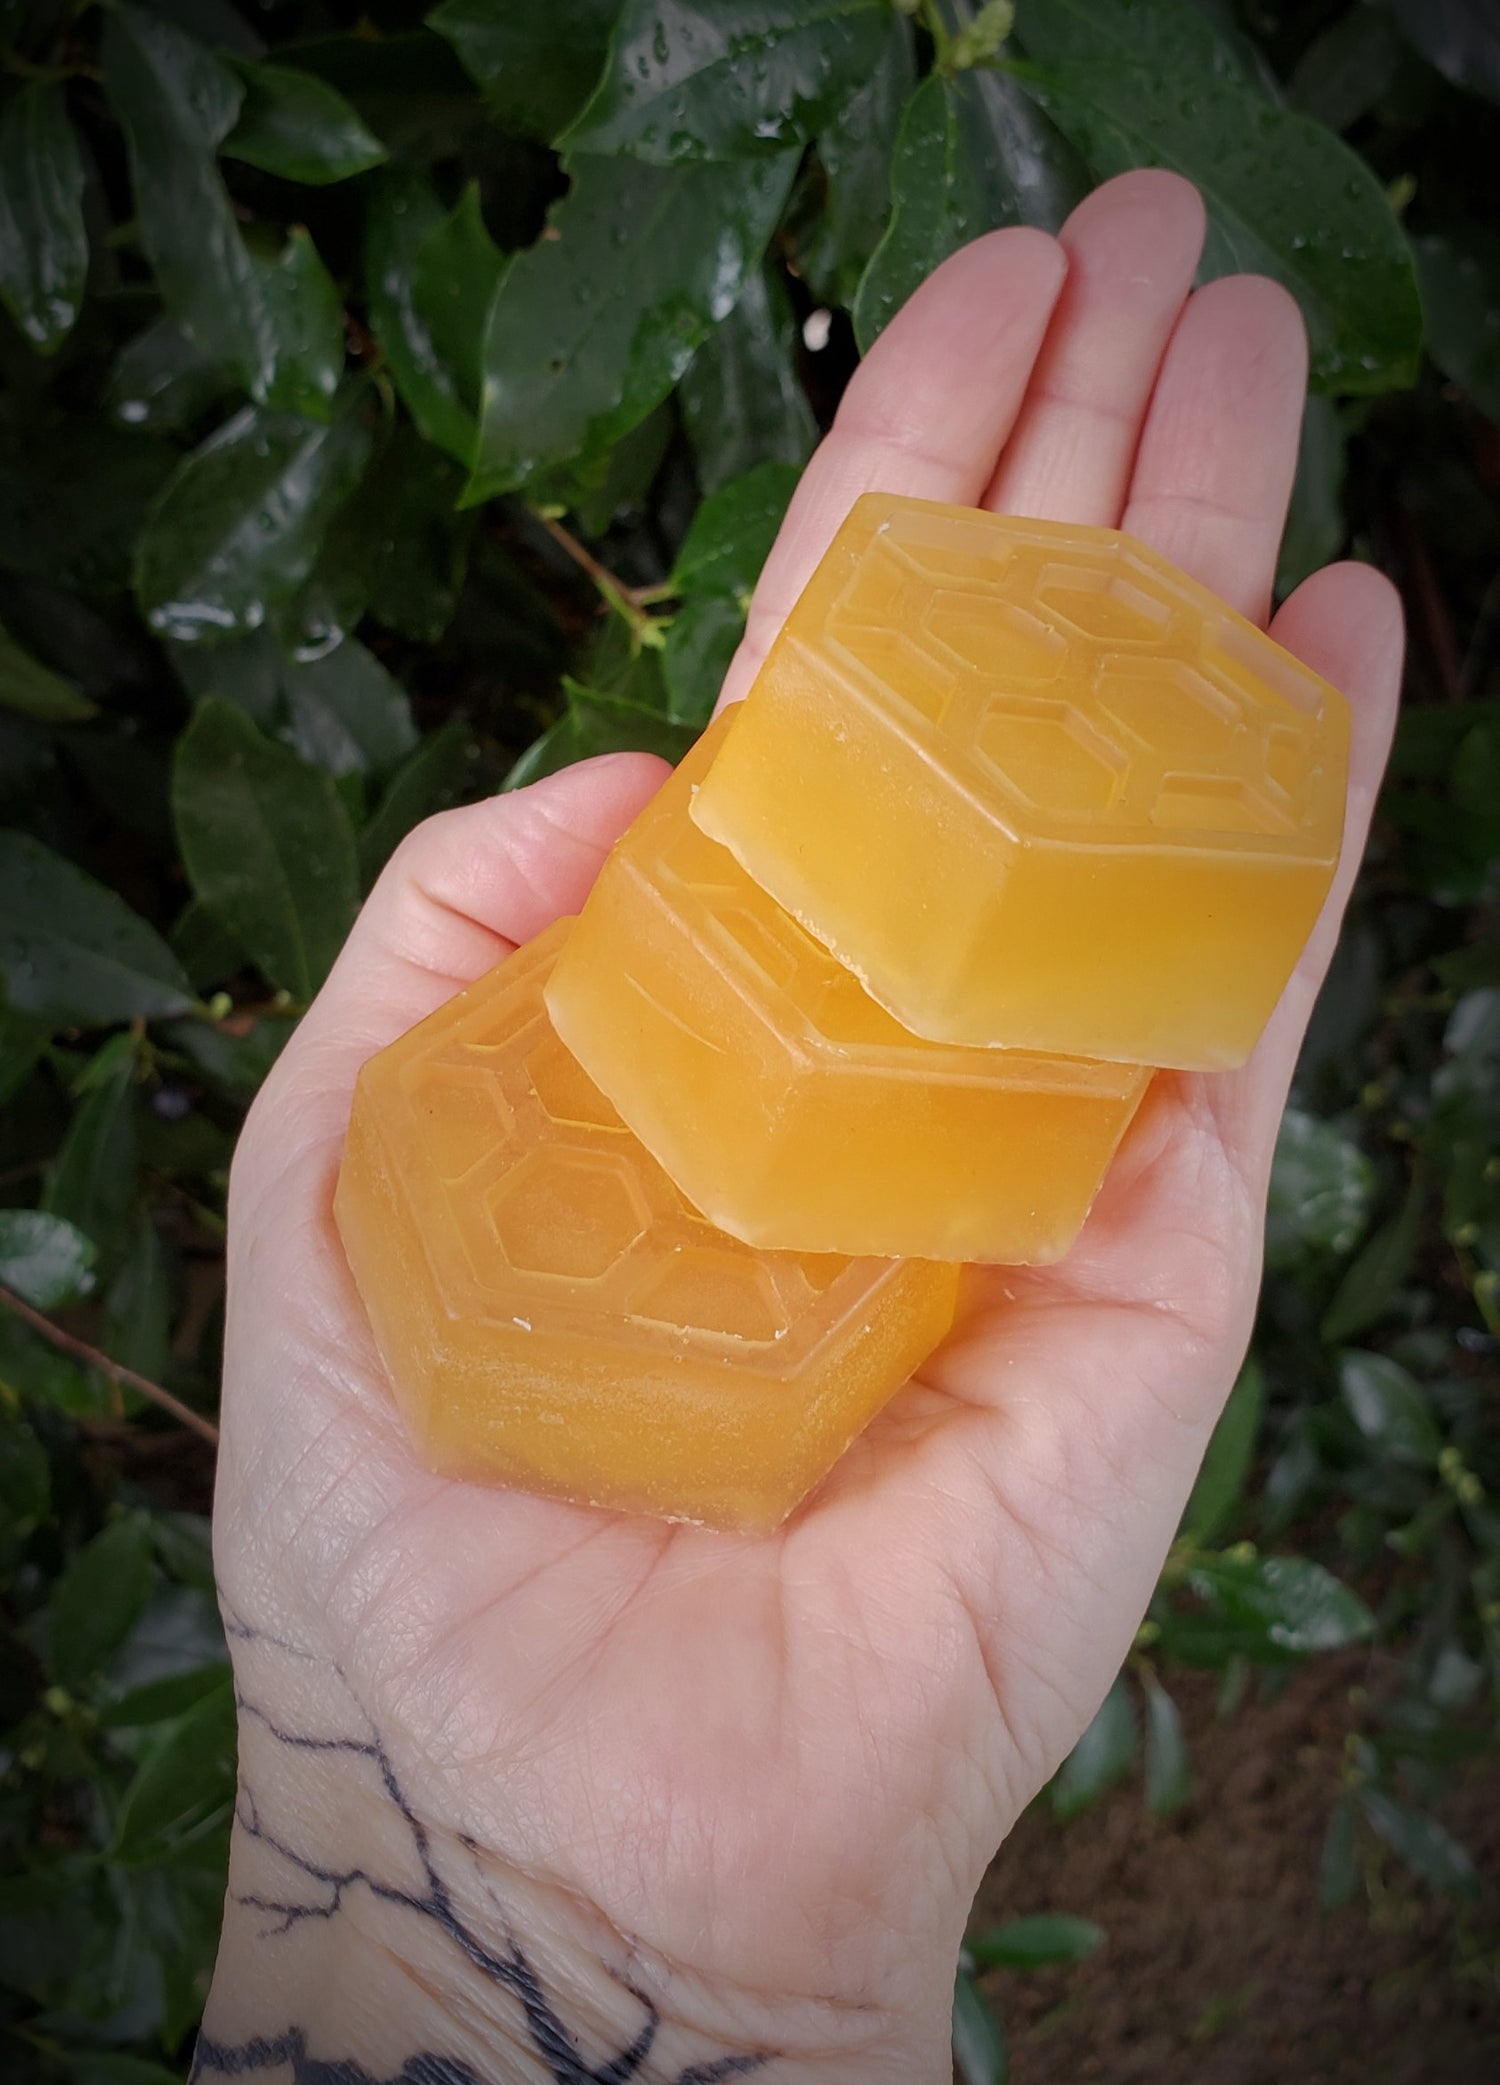 "The Bees Knees" Handmade Honey Glycerin Soap Scented with Honeysuckle